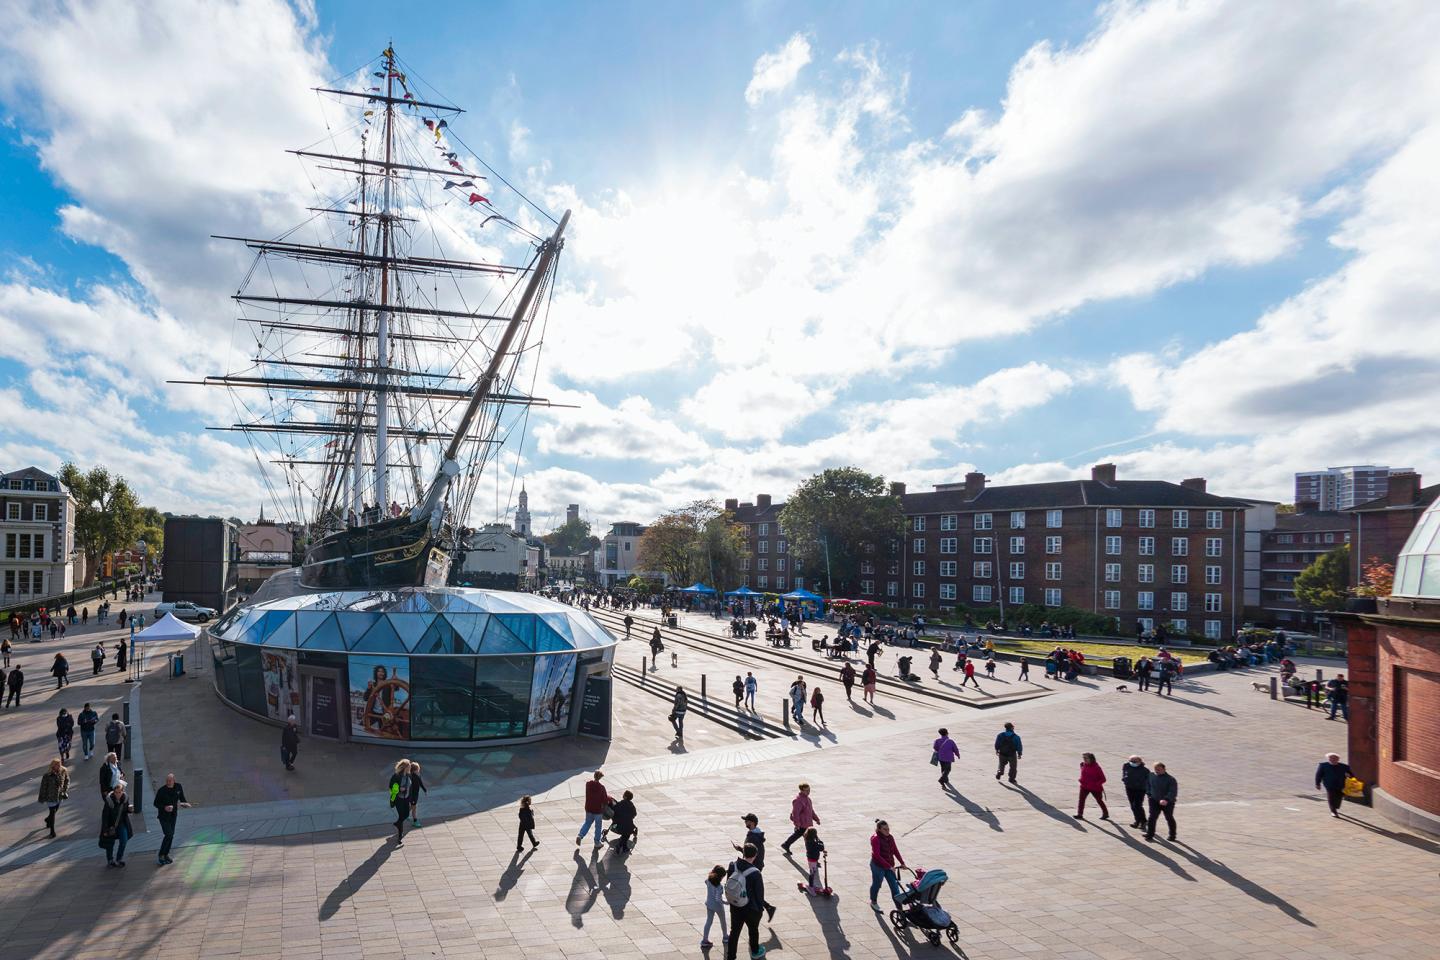 View of Cutty Sark and people walking around the ship 